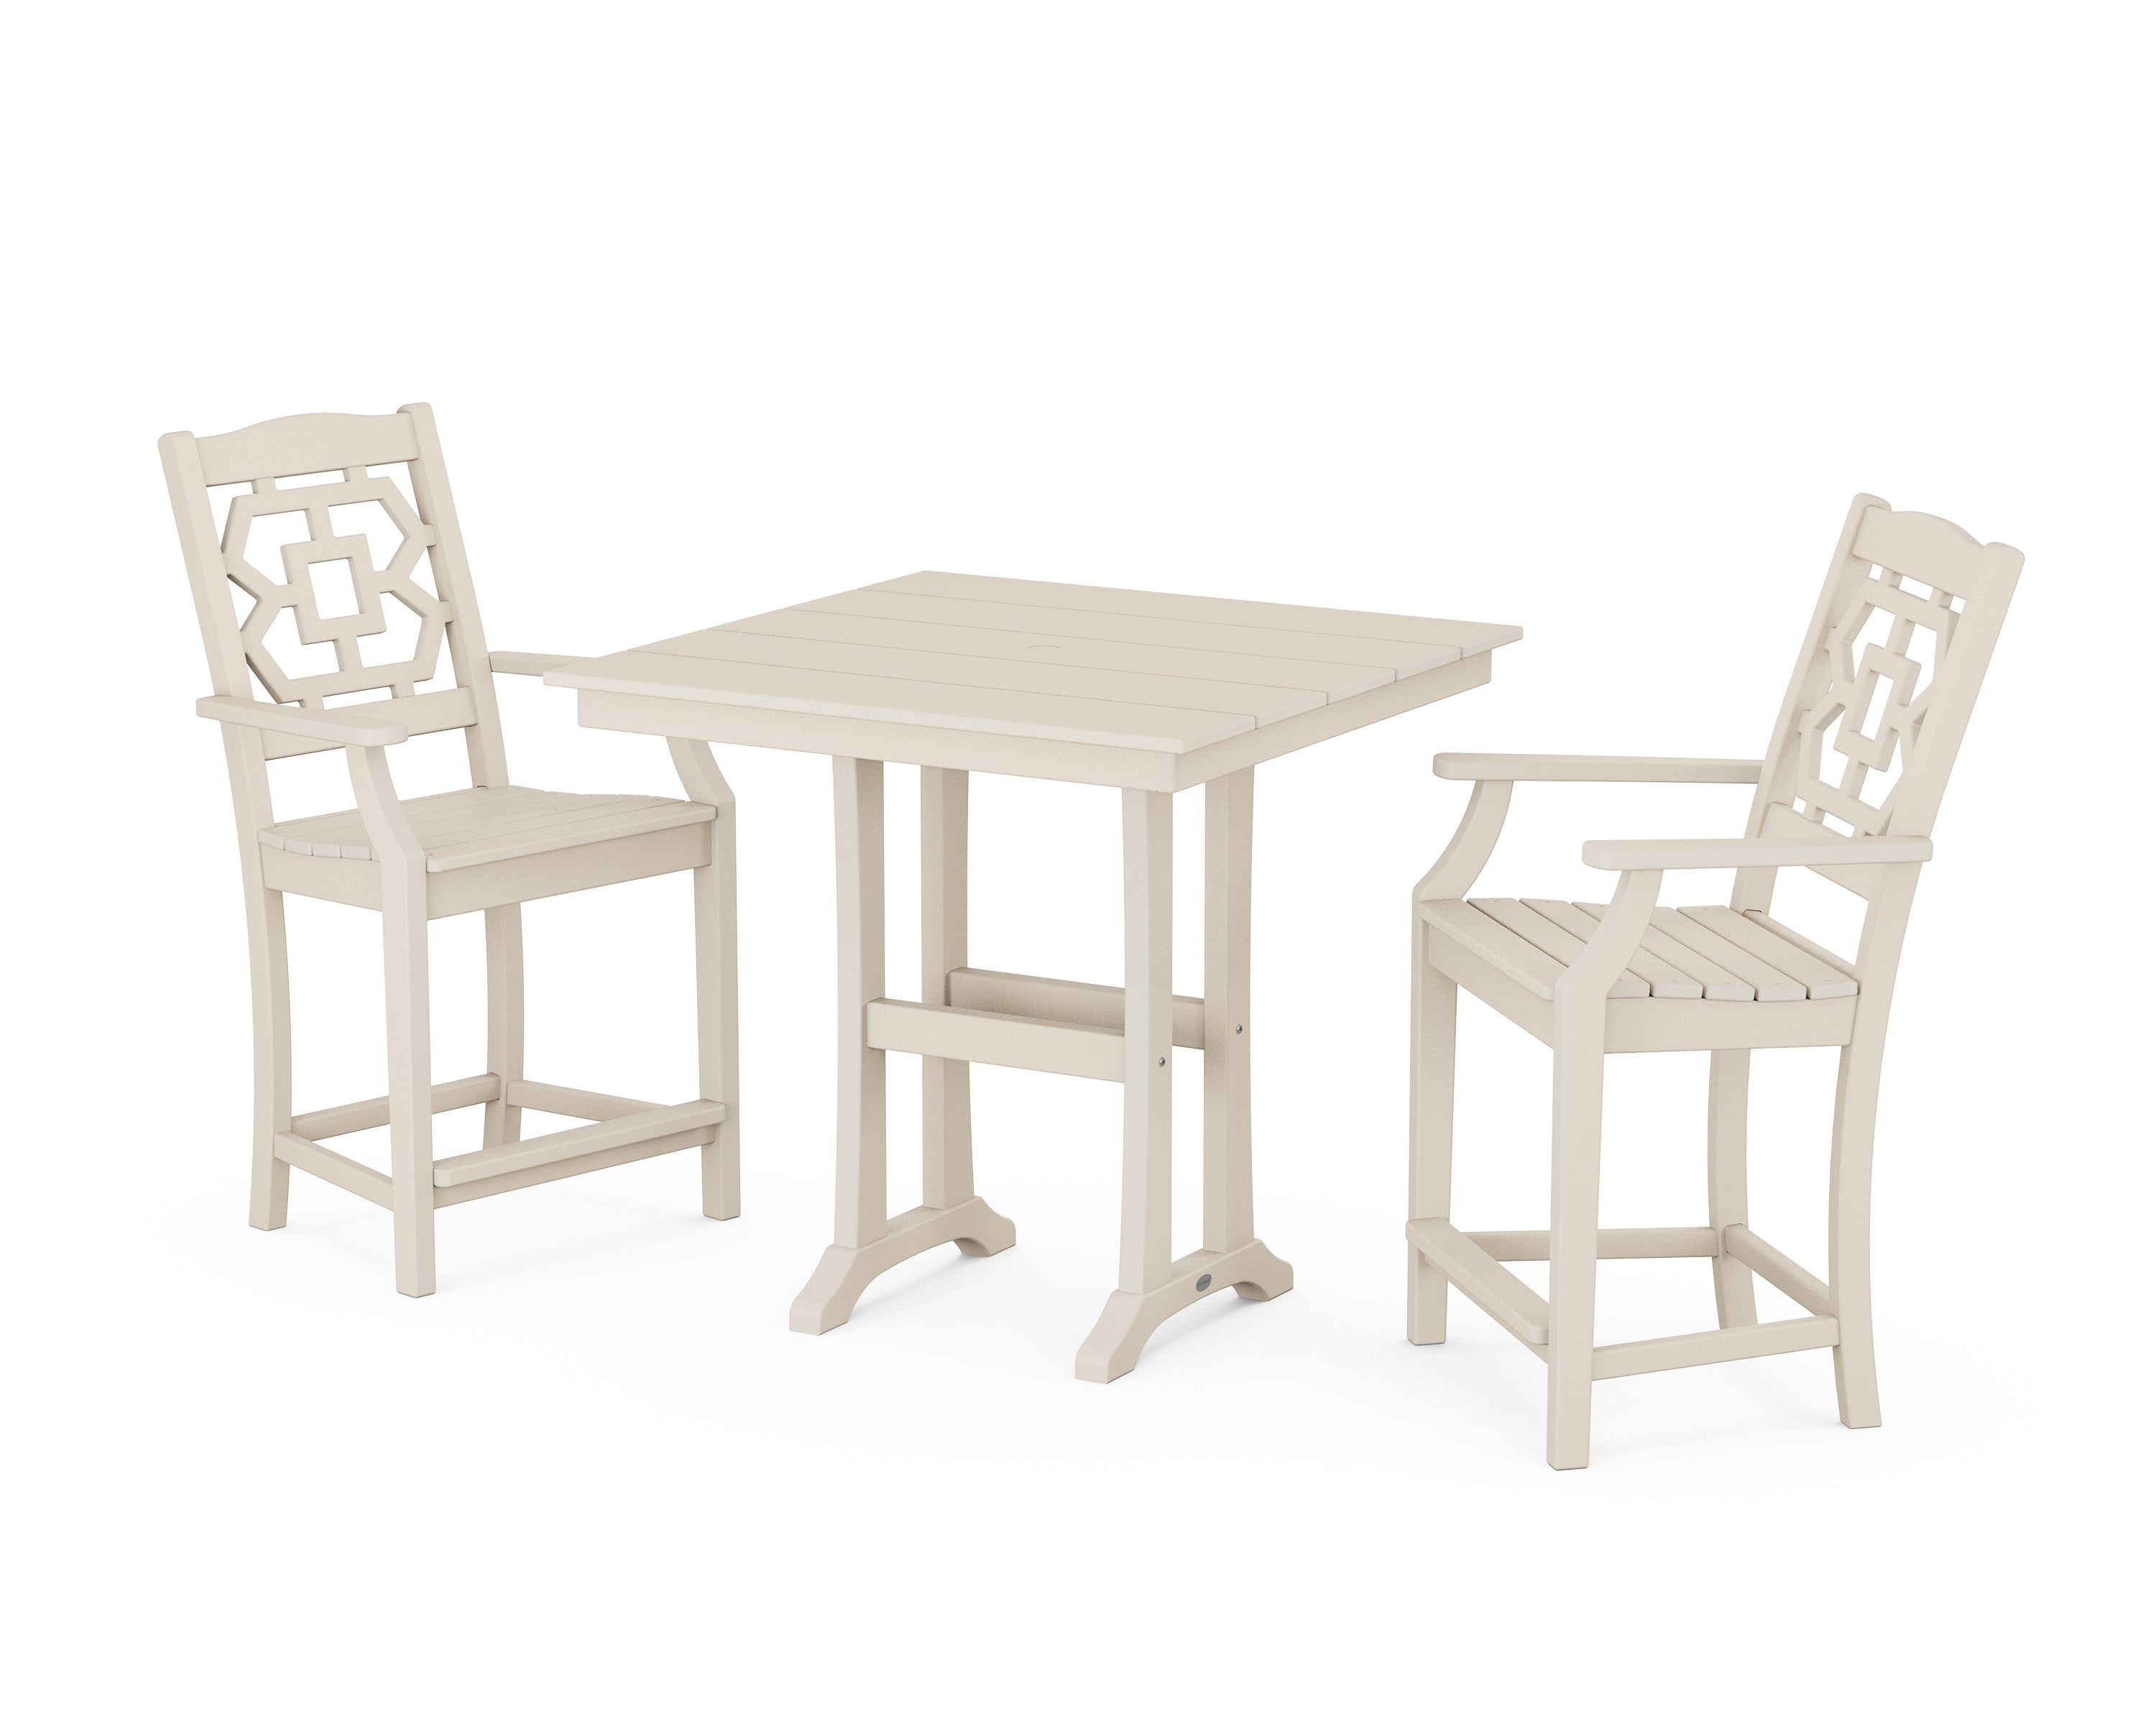 Martha Stewart by POLYWOOD® Chinoiserie 3-Piece Farmhouse Counter Set with Trestle Legs in Sand